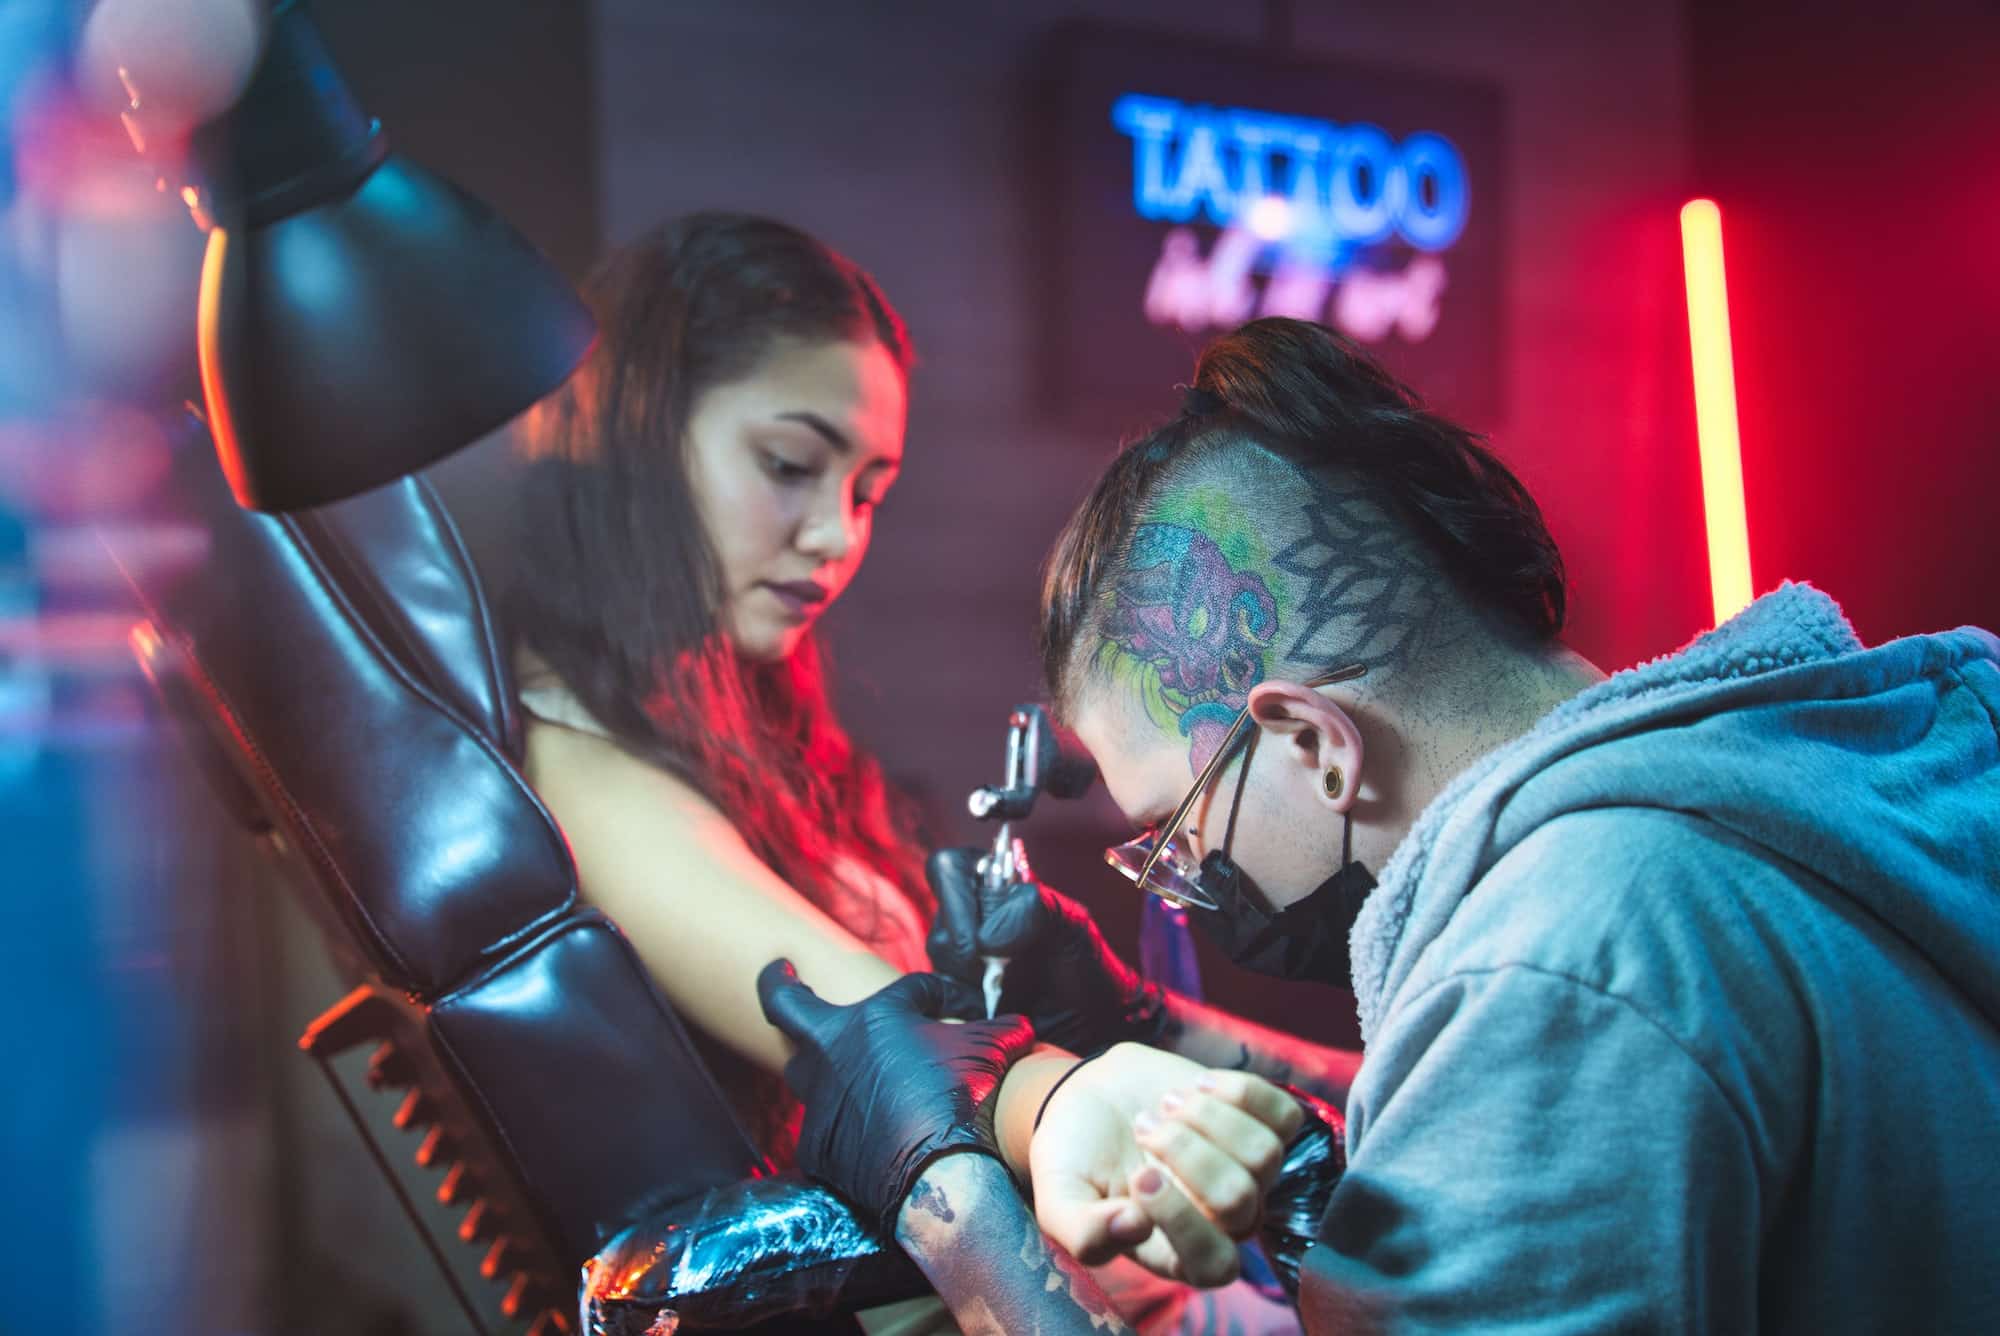 Artist Drawing Tattoo On Client In Parlor